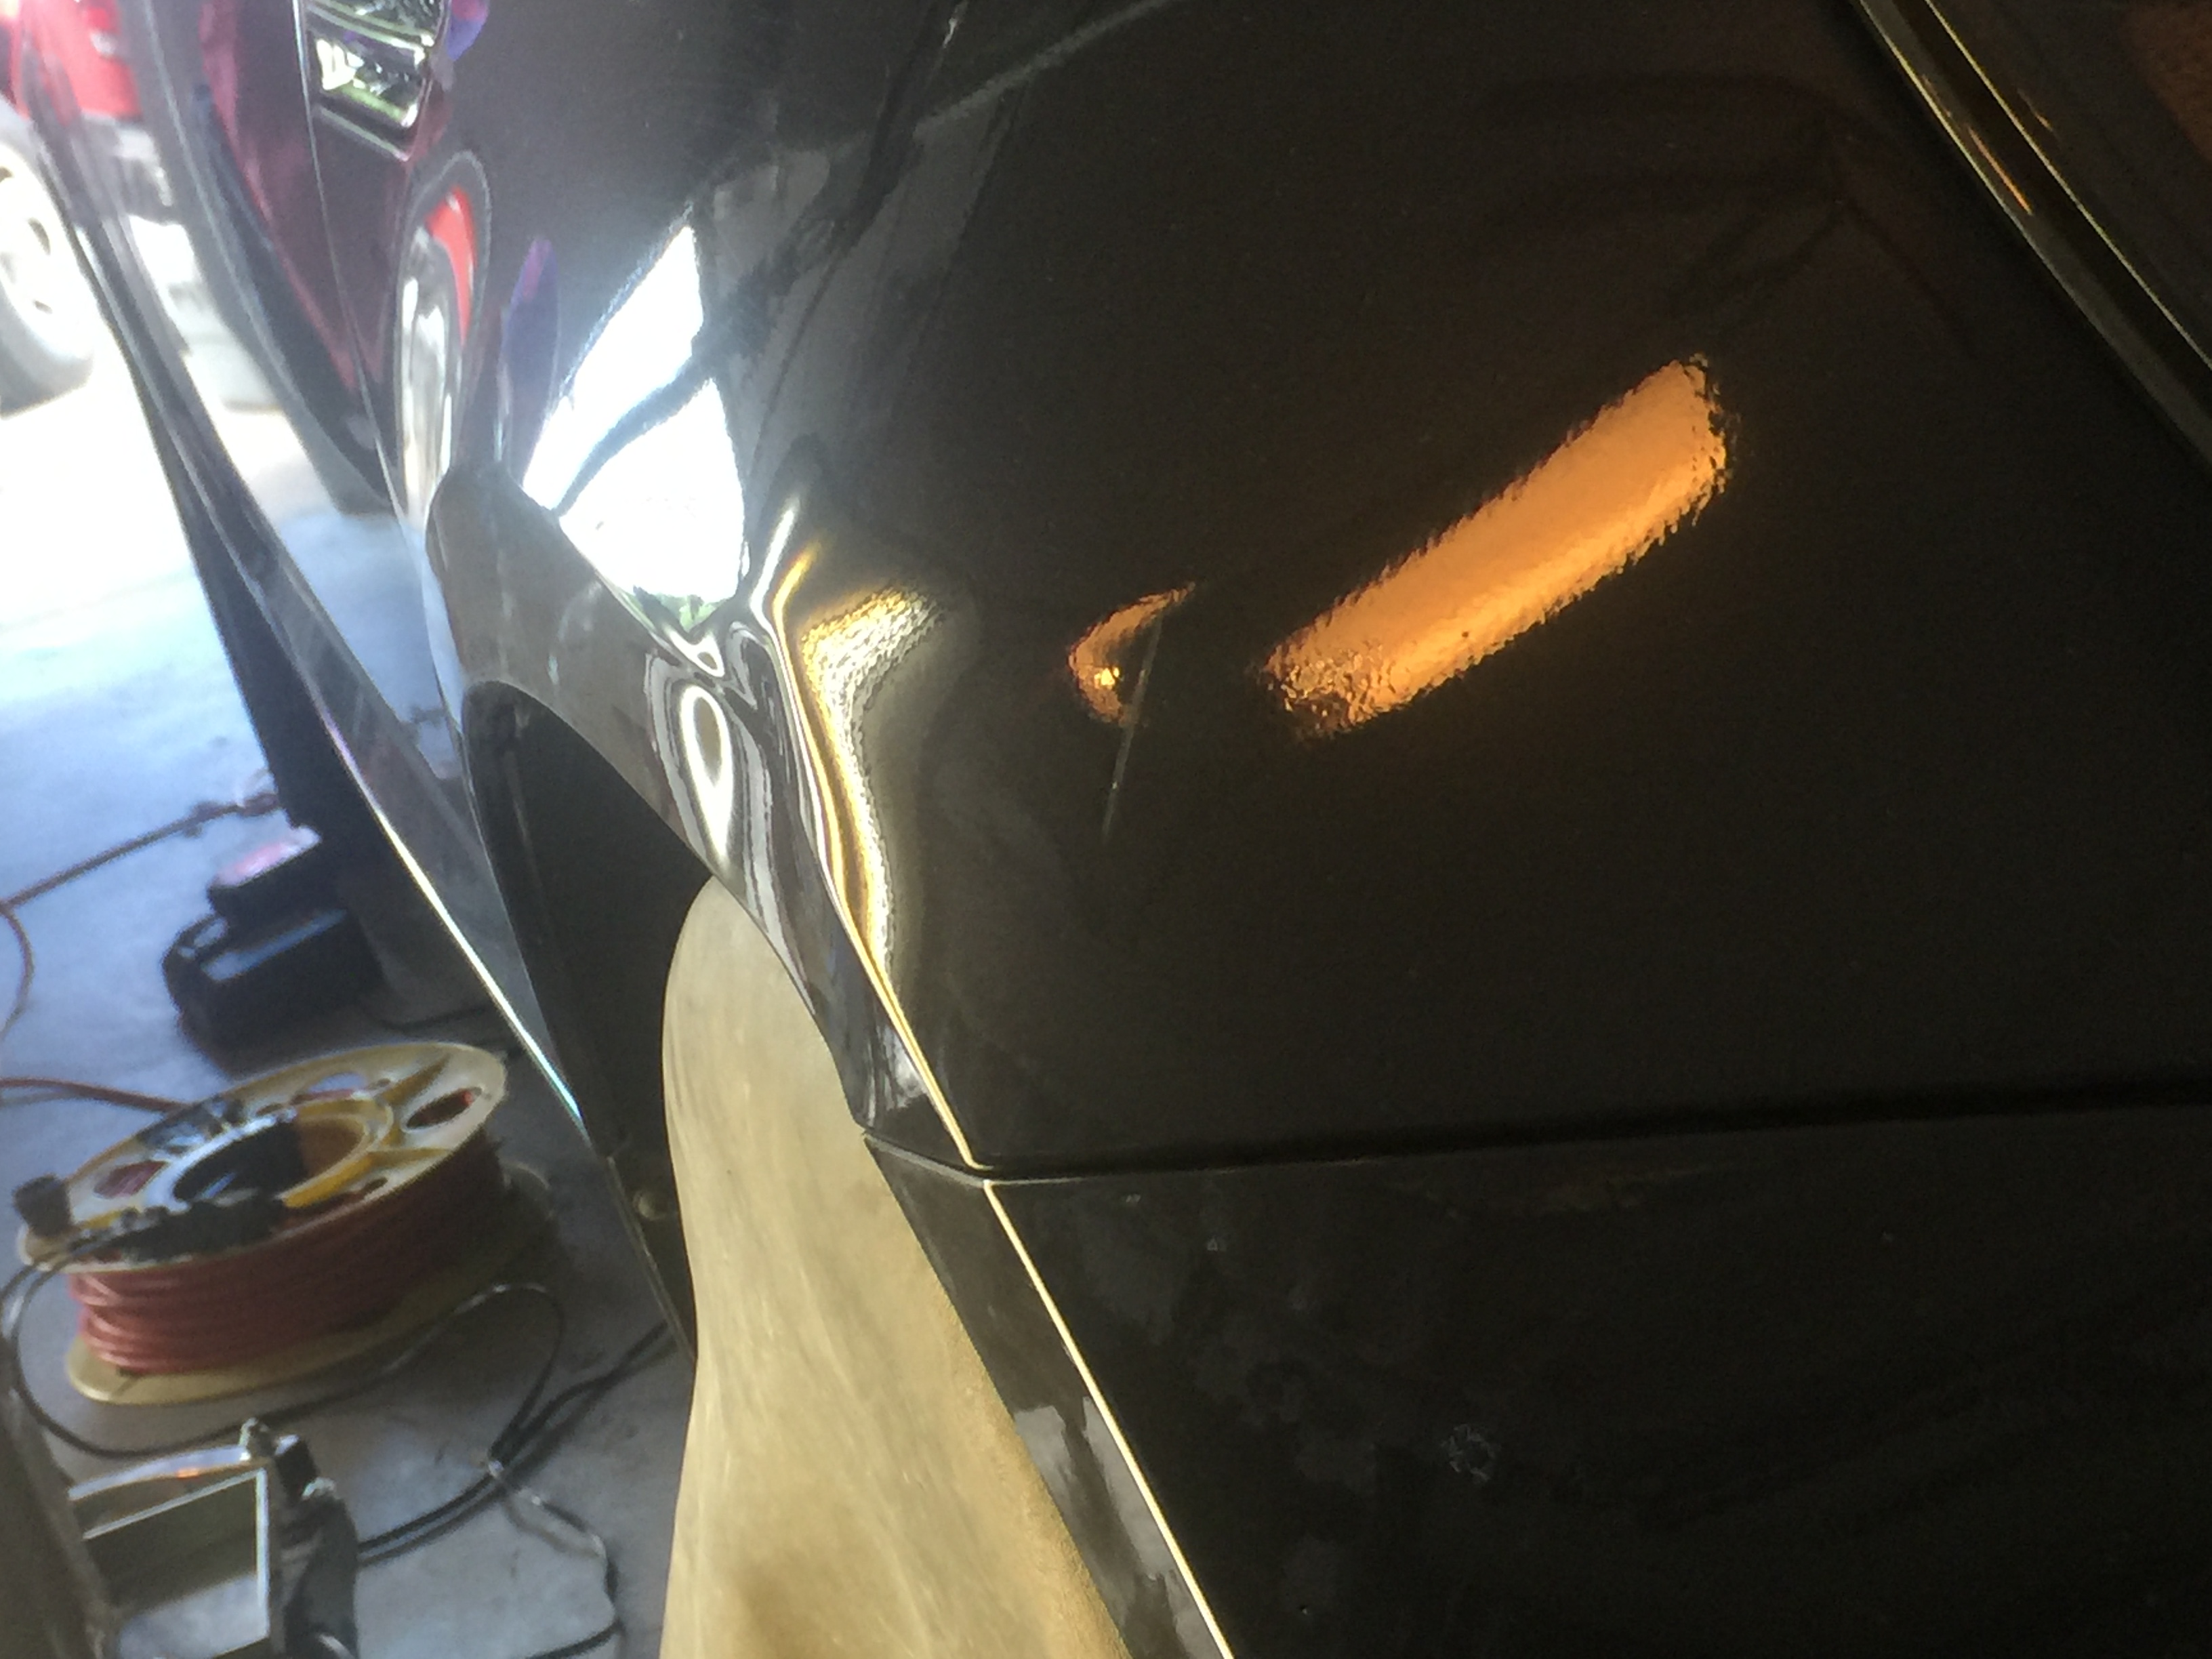 2011 Kia Optima Fender dent repair, with paintless dent removal process, large dent repair, in Springfield, IL. https://217dent.com